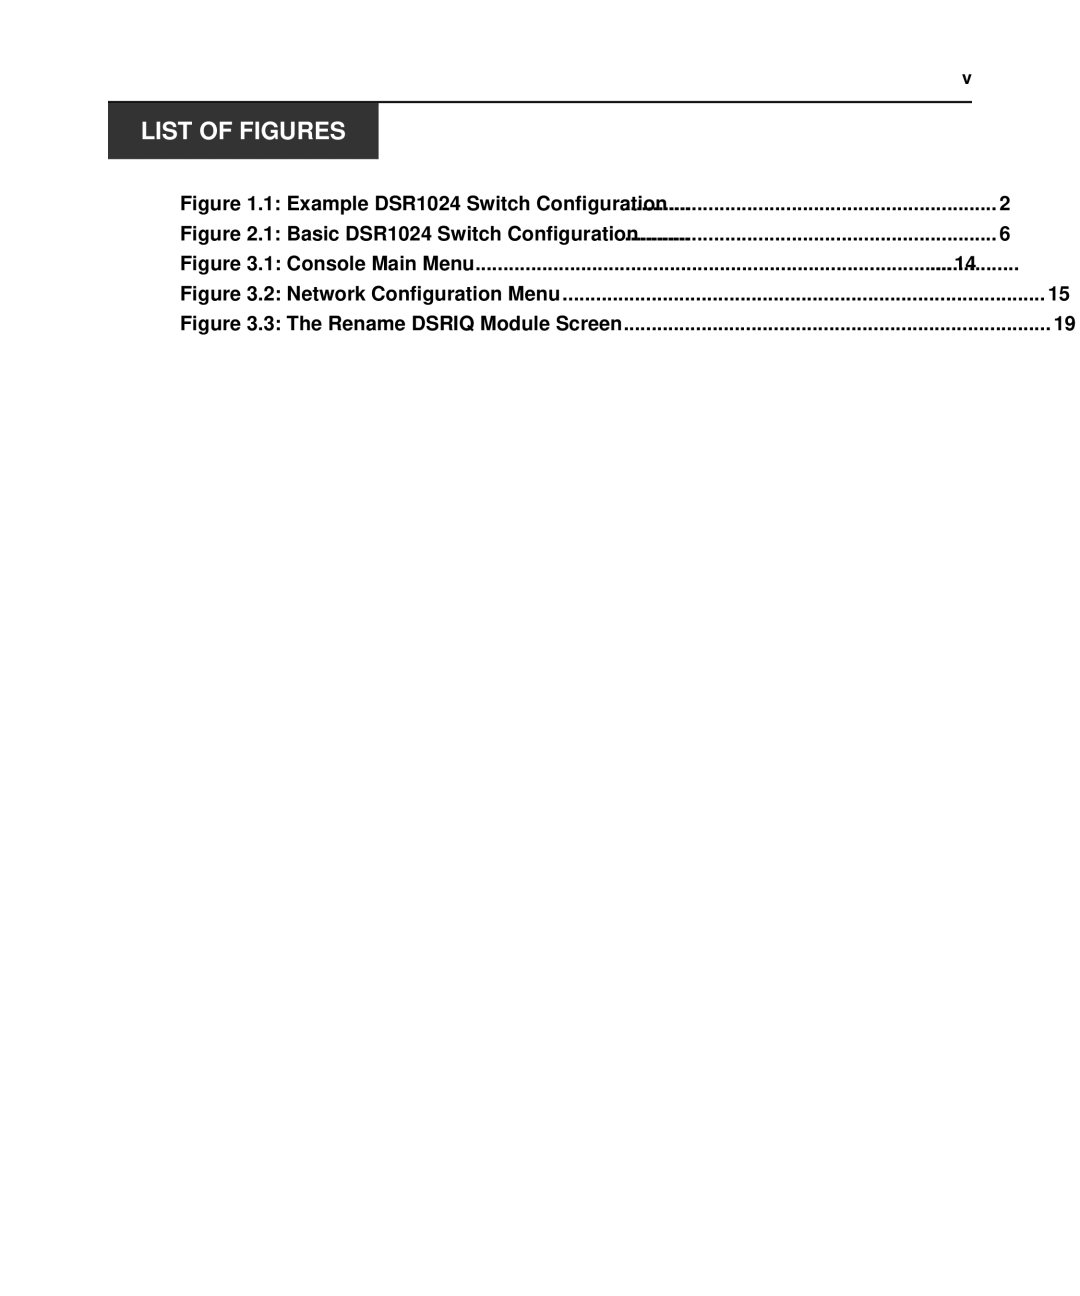 Avocent 1024 manual List of Figures 